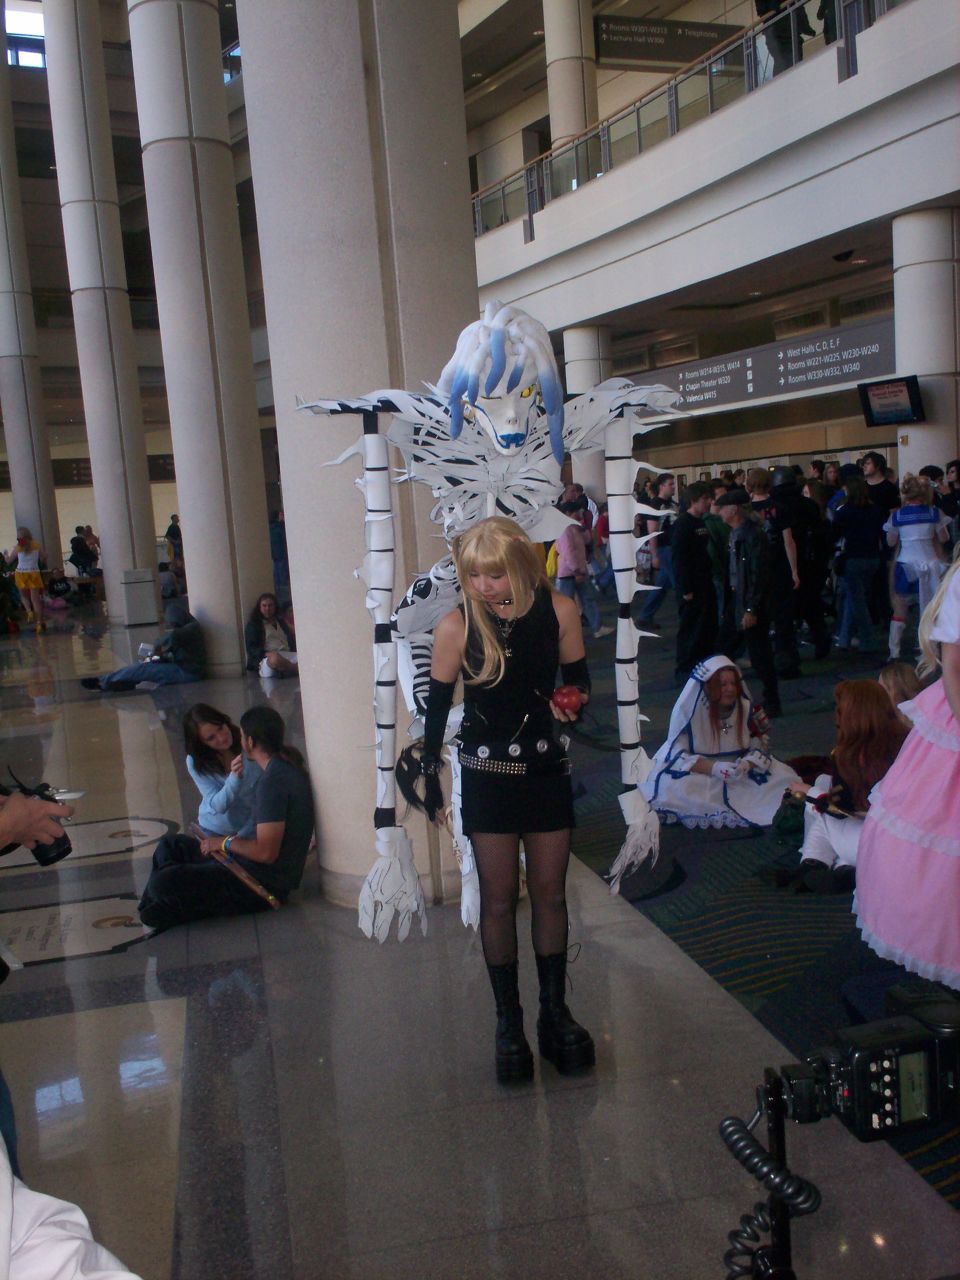 a woman dressed in black costume next to pillars